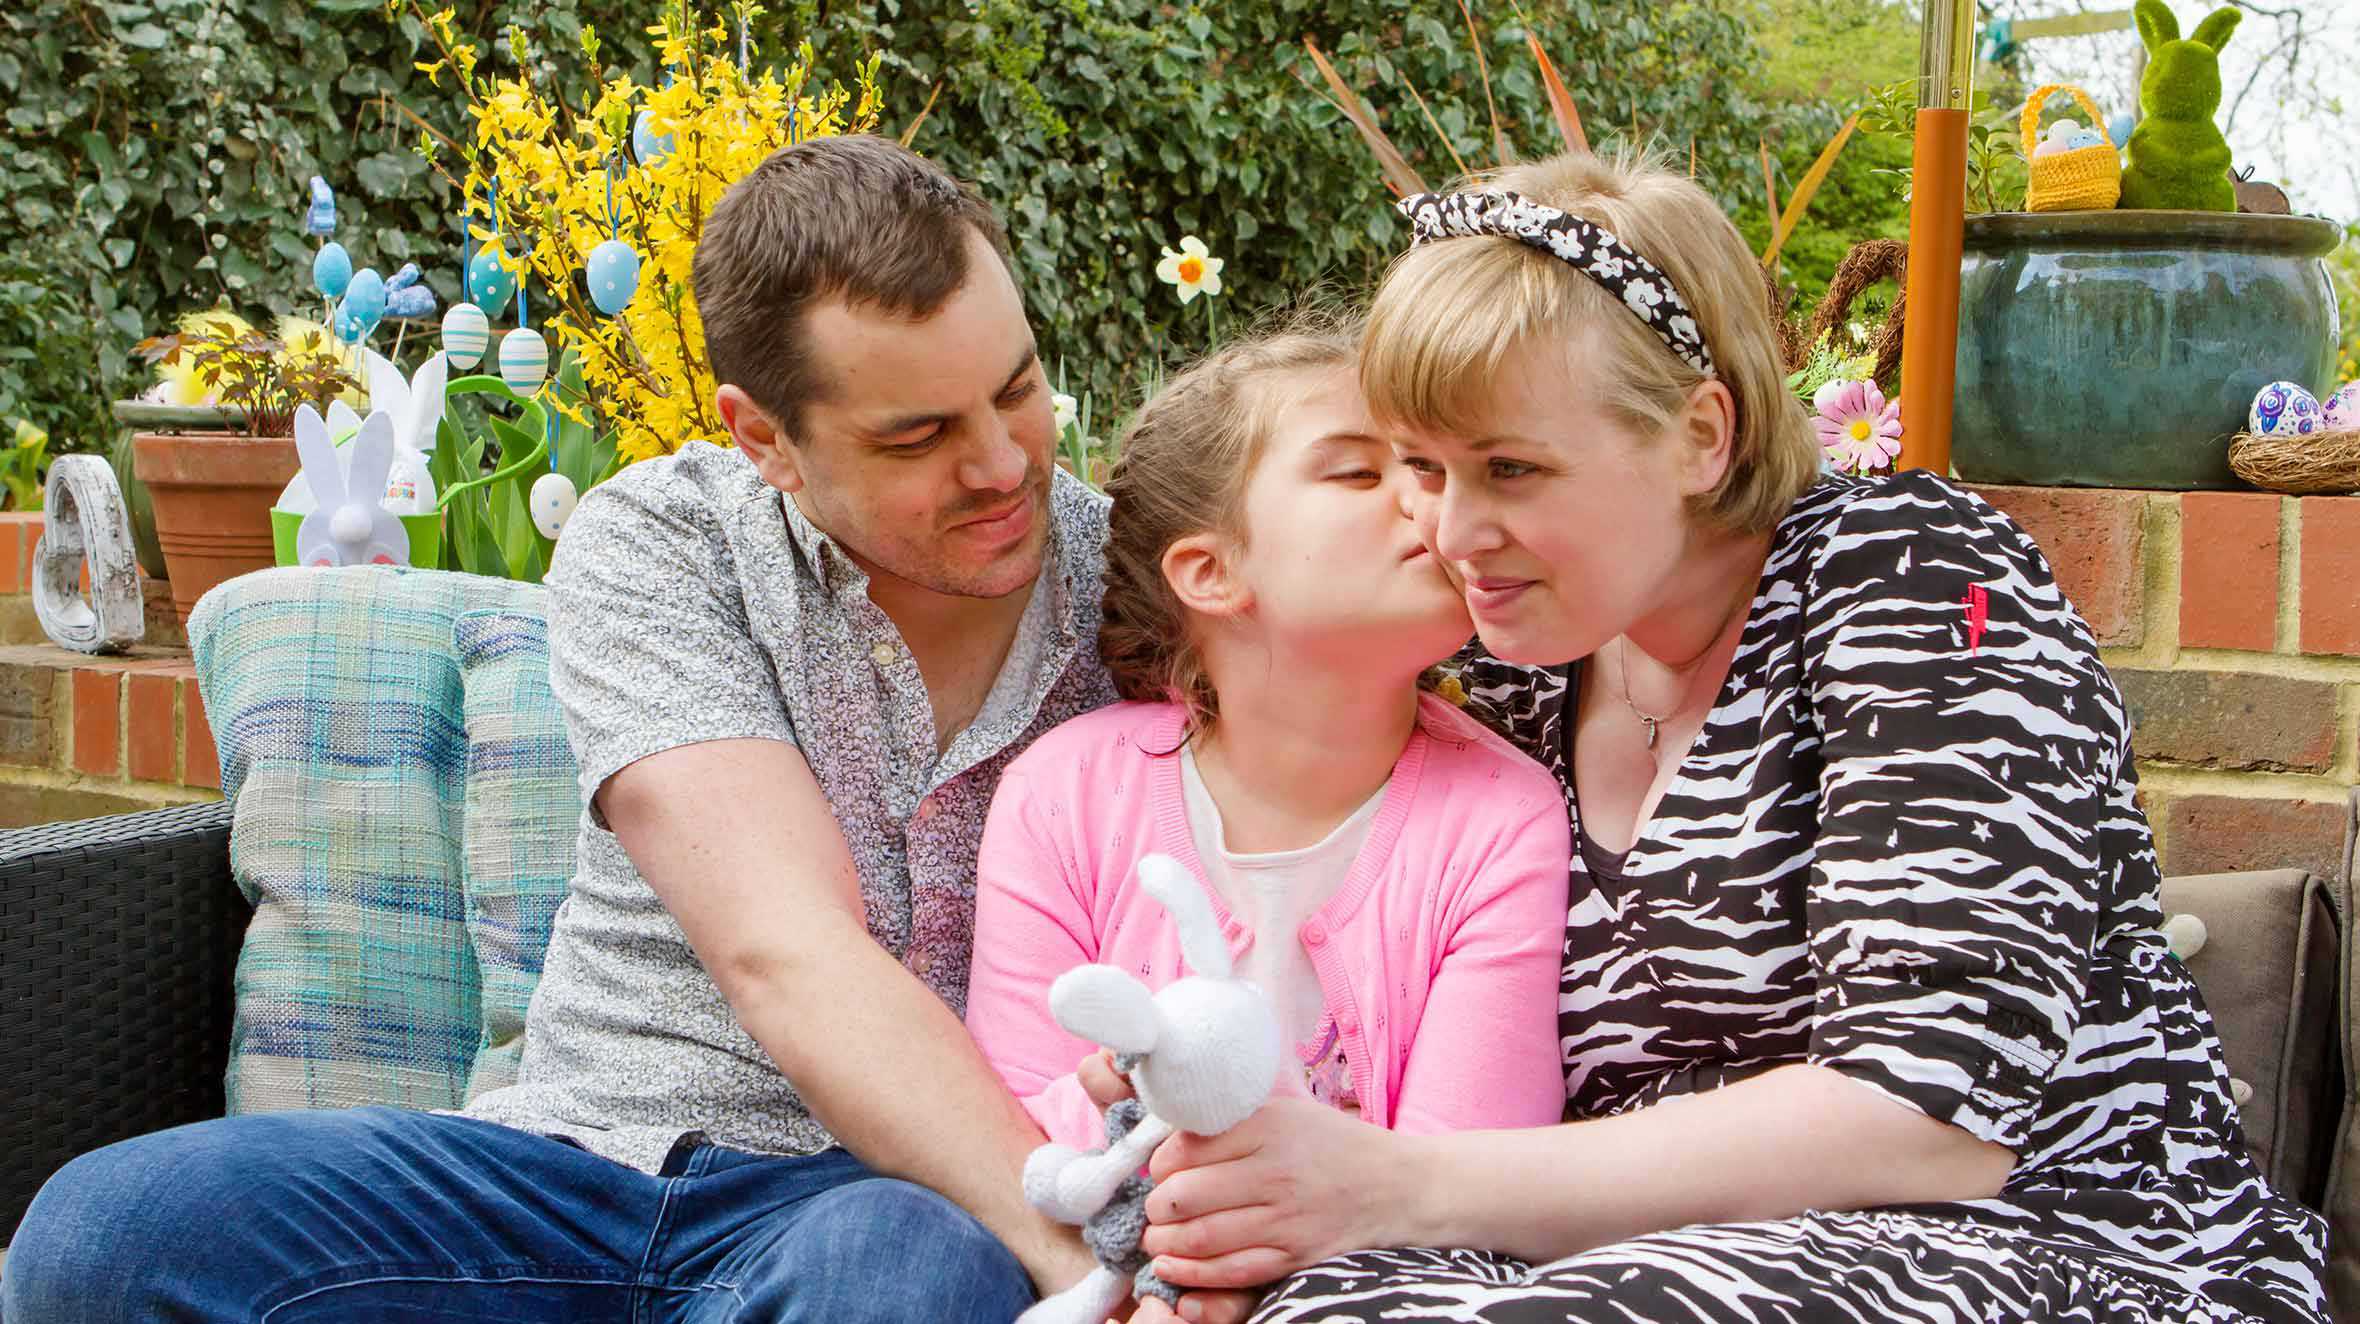 Gracie, sitting on a bench with her mum and dad and kissing her mum on the cheek